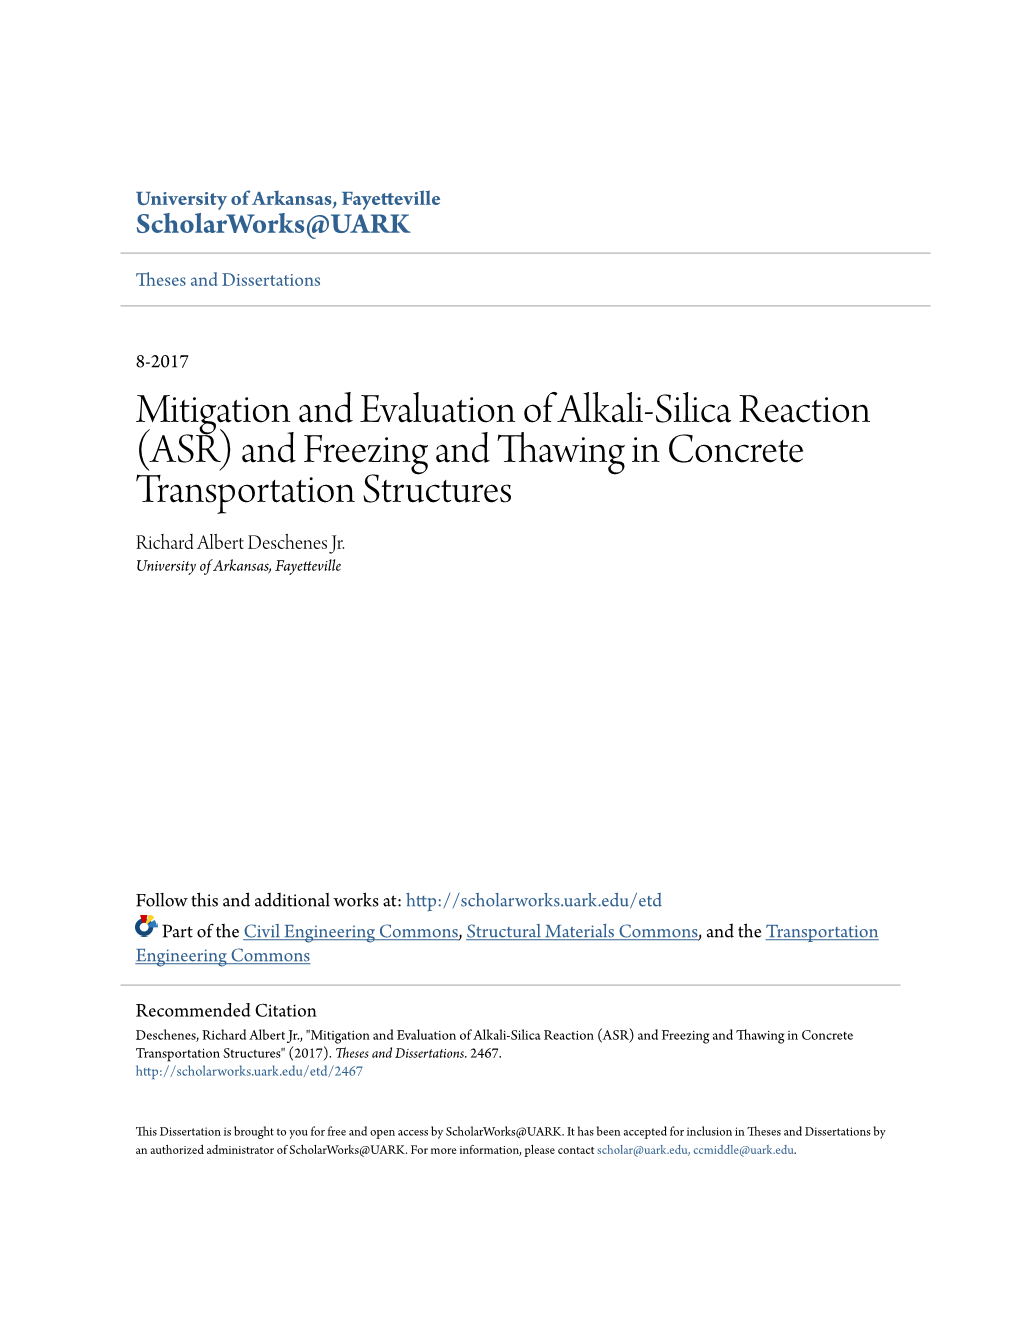 Mitigation and Evaluation of Alkali-Silica Reaction (ASR) and Freezing and Thawing in Concrete Transportation Structures Richard Albert Deschenes Jr